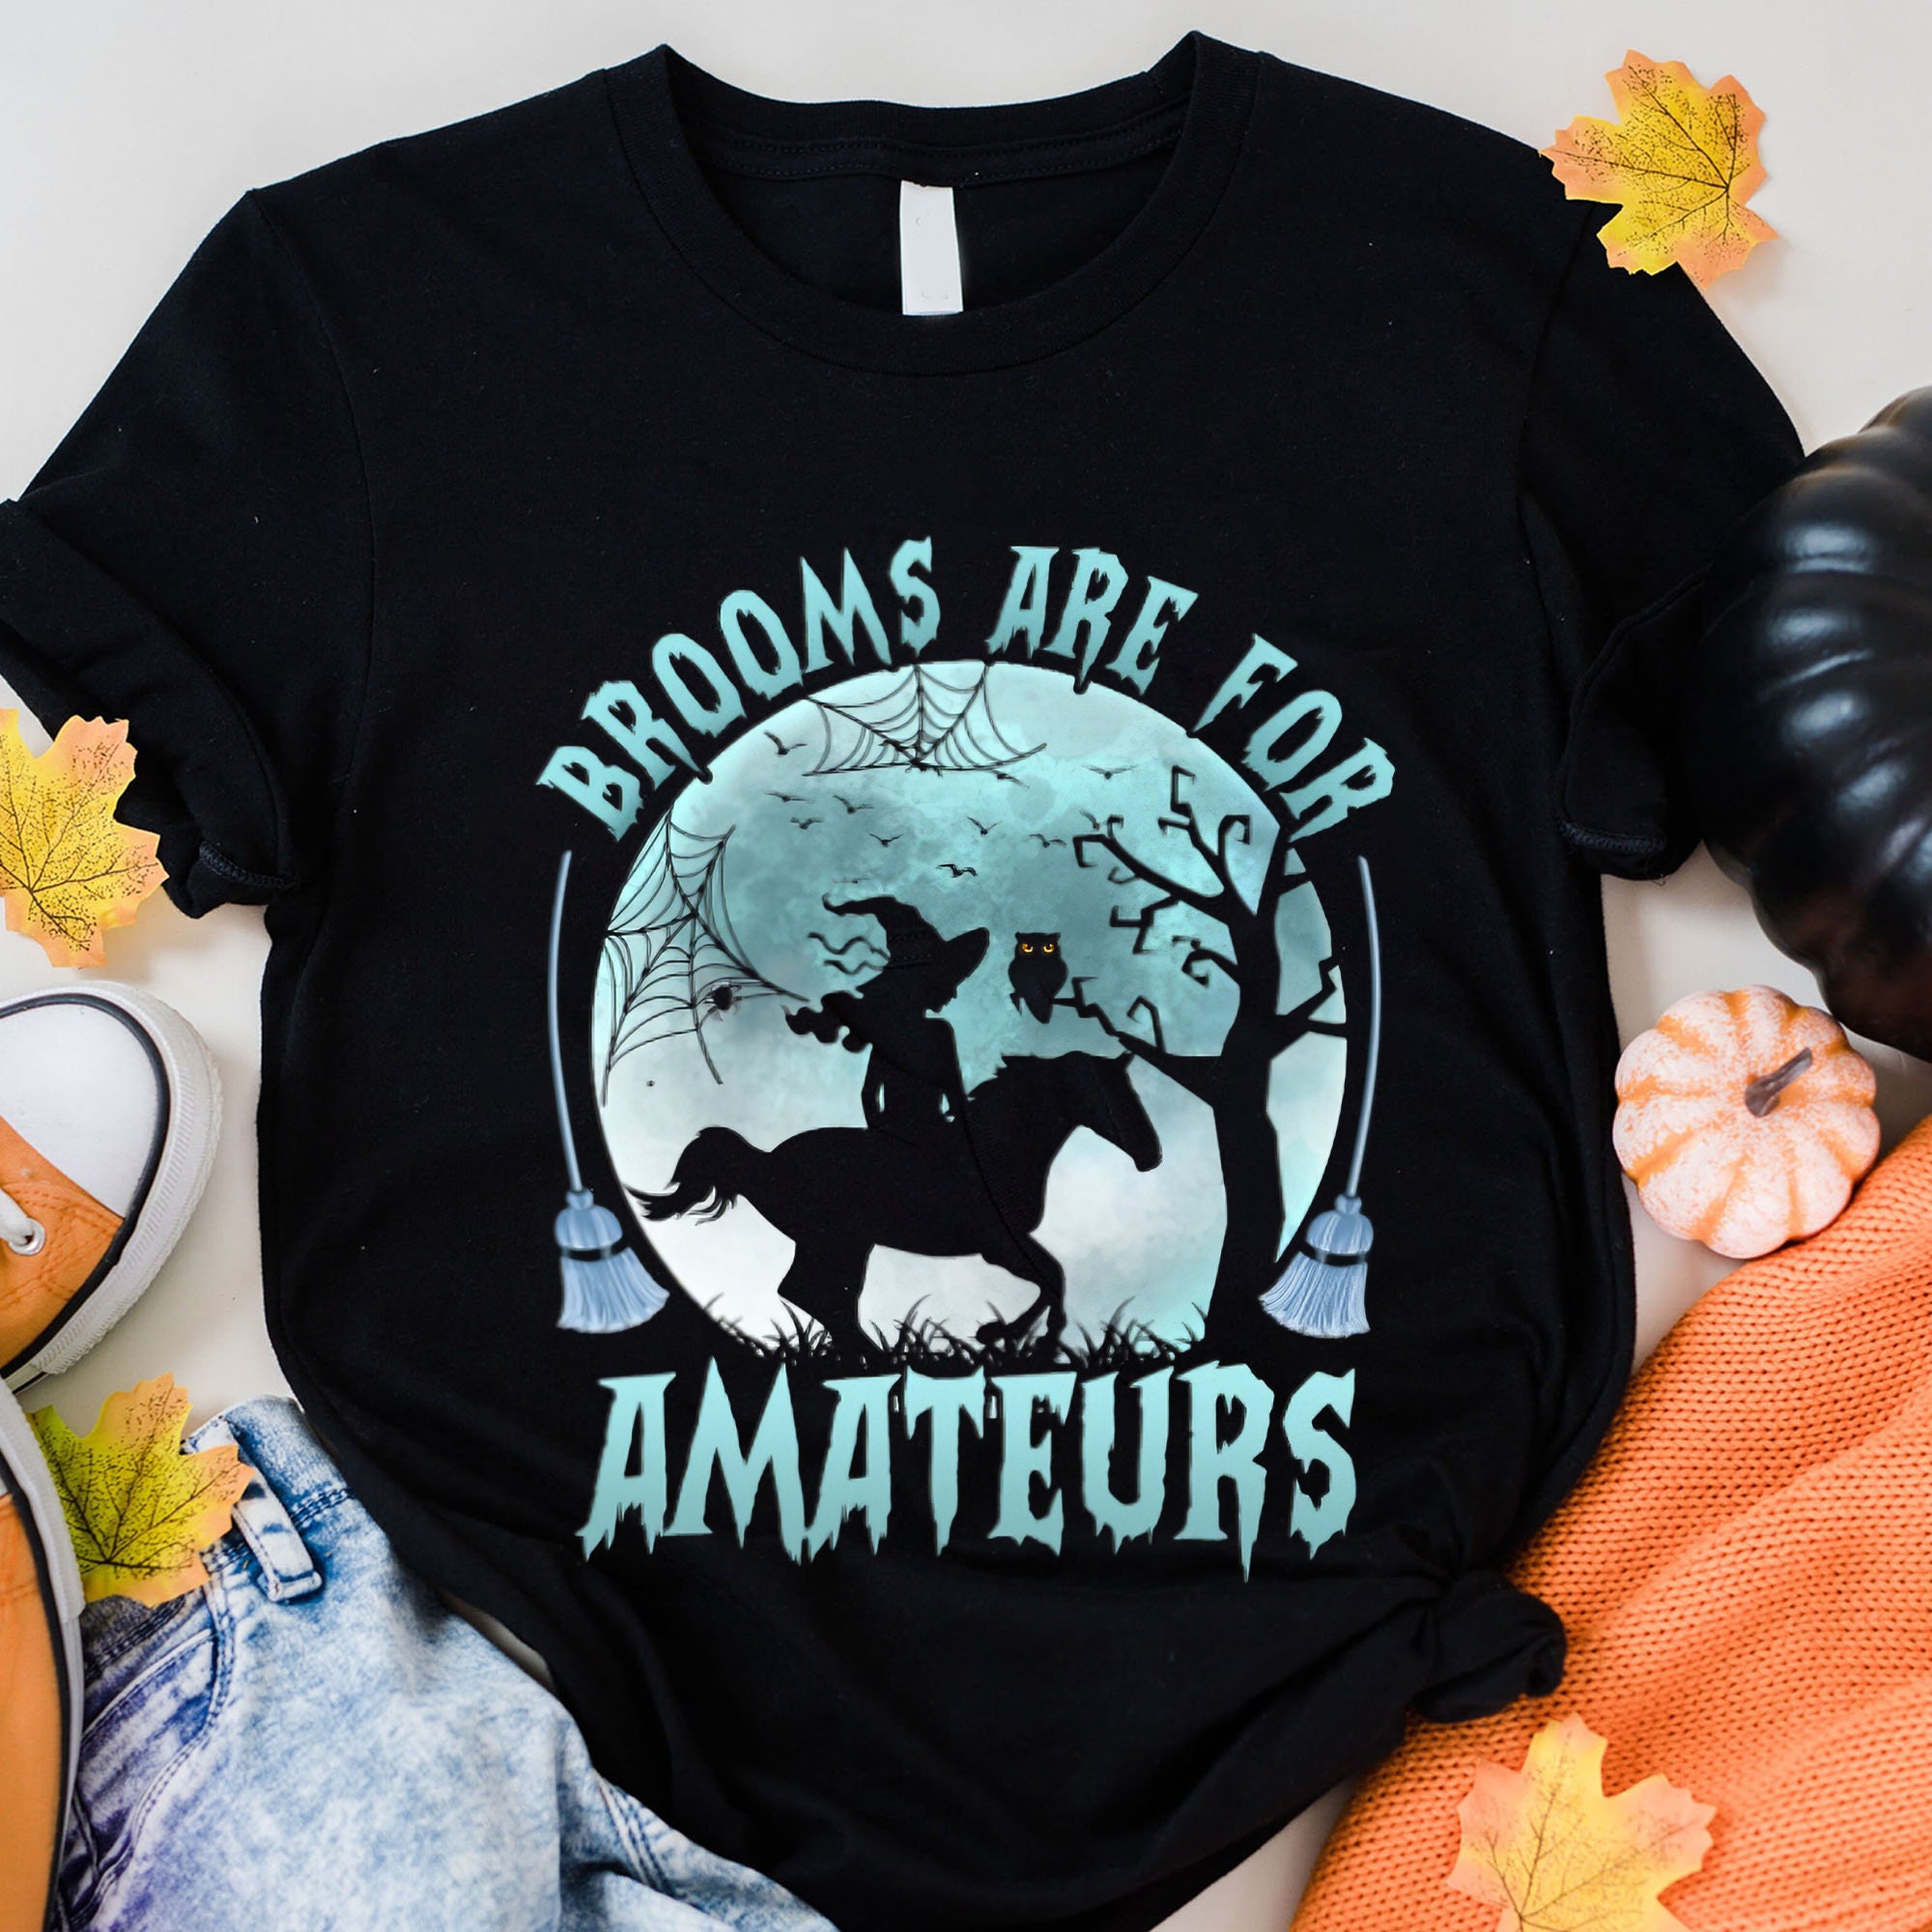 Discover Horse Brooms Are For Amateurs Shirt